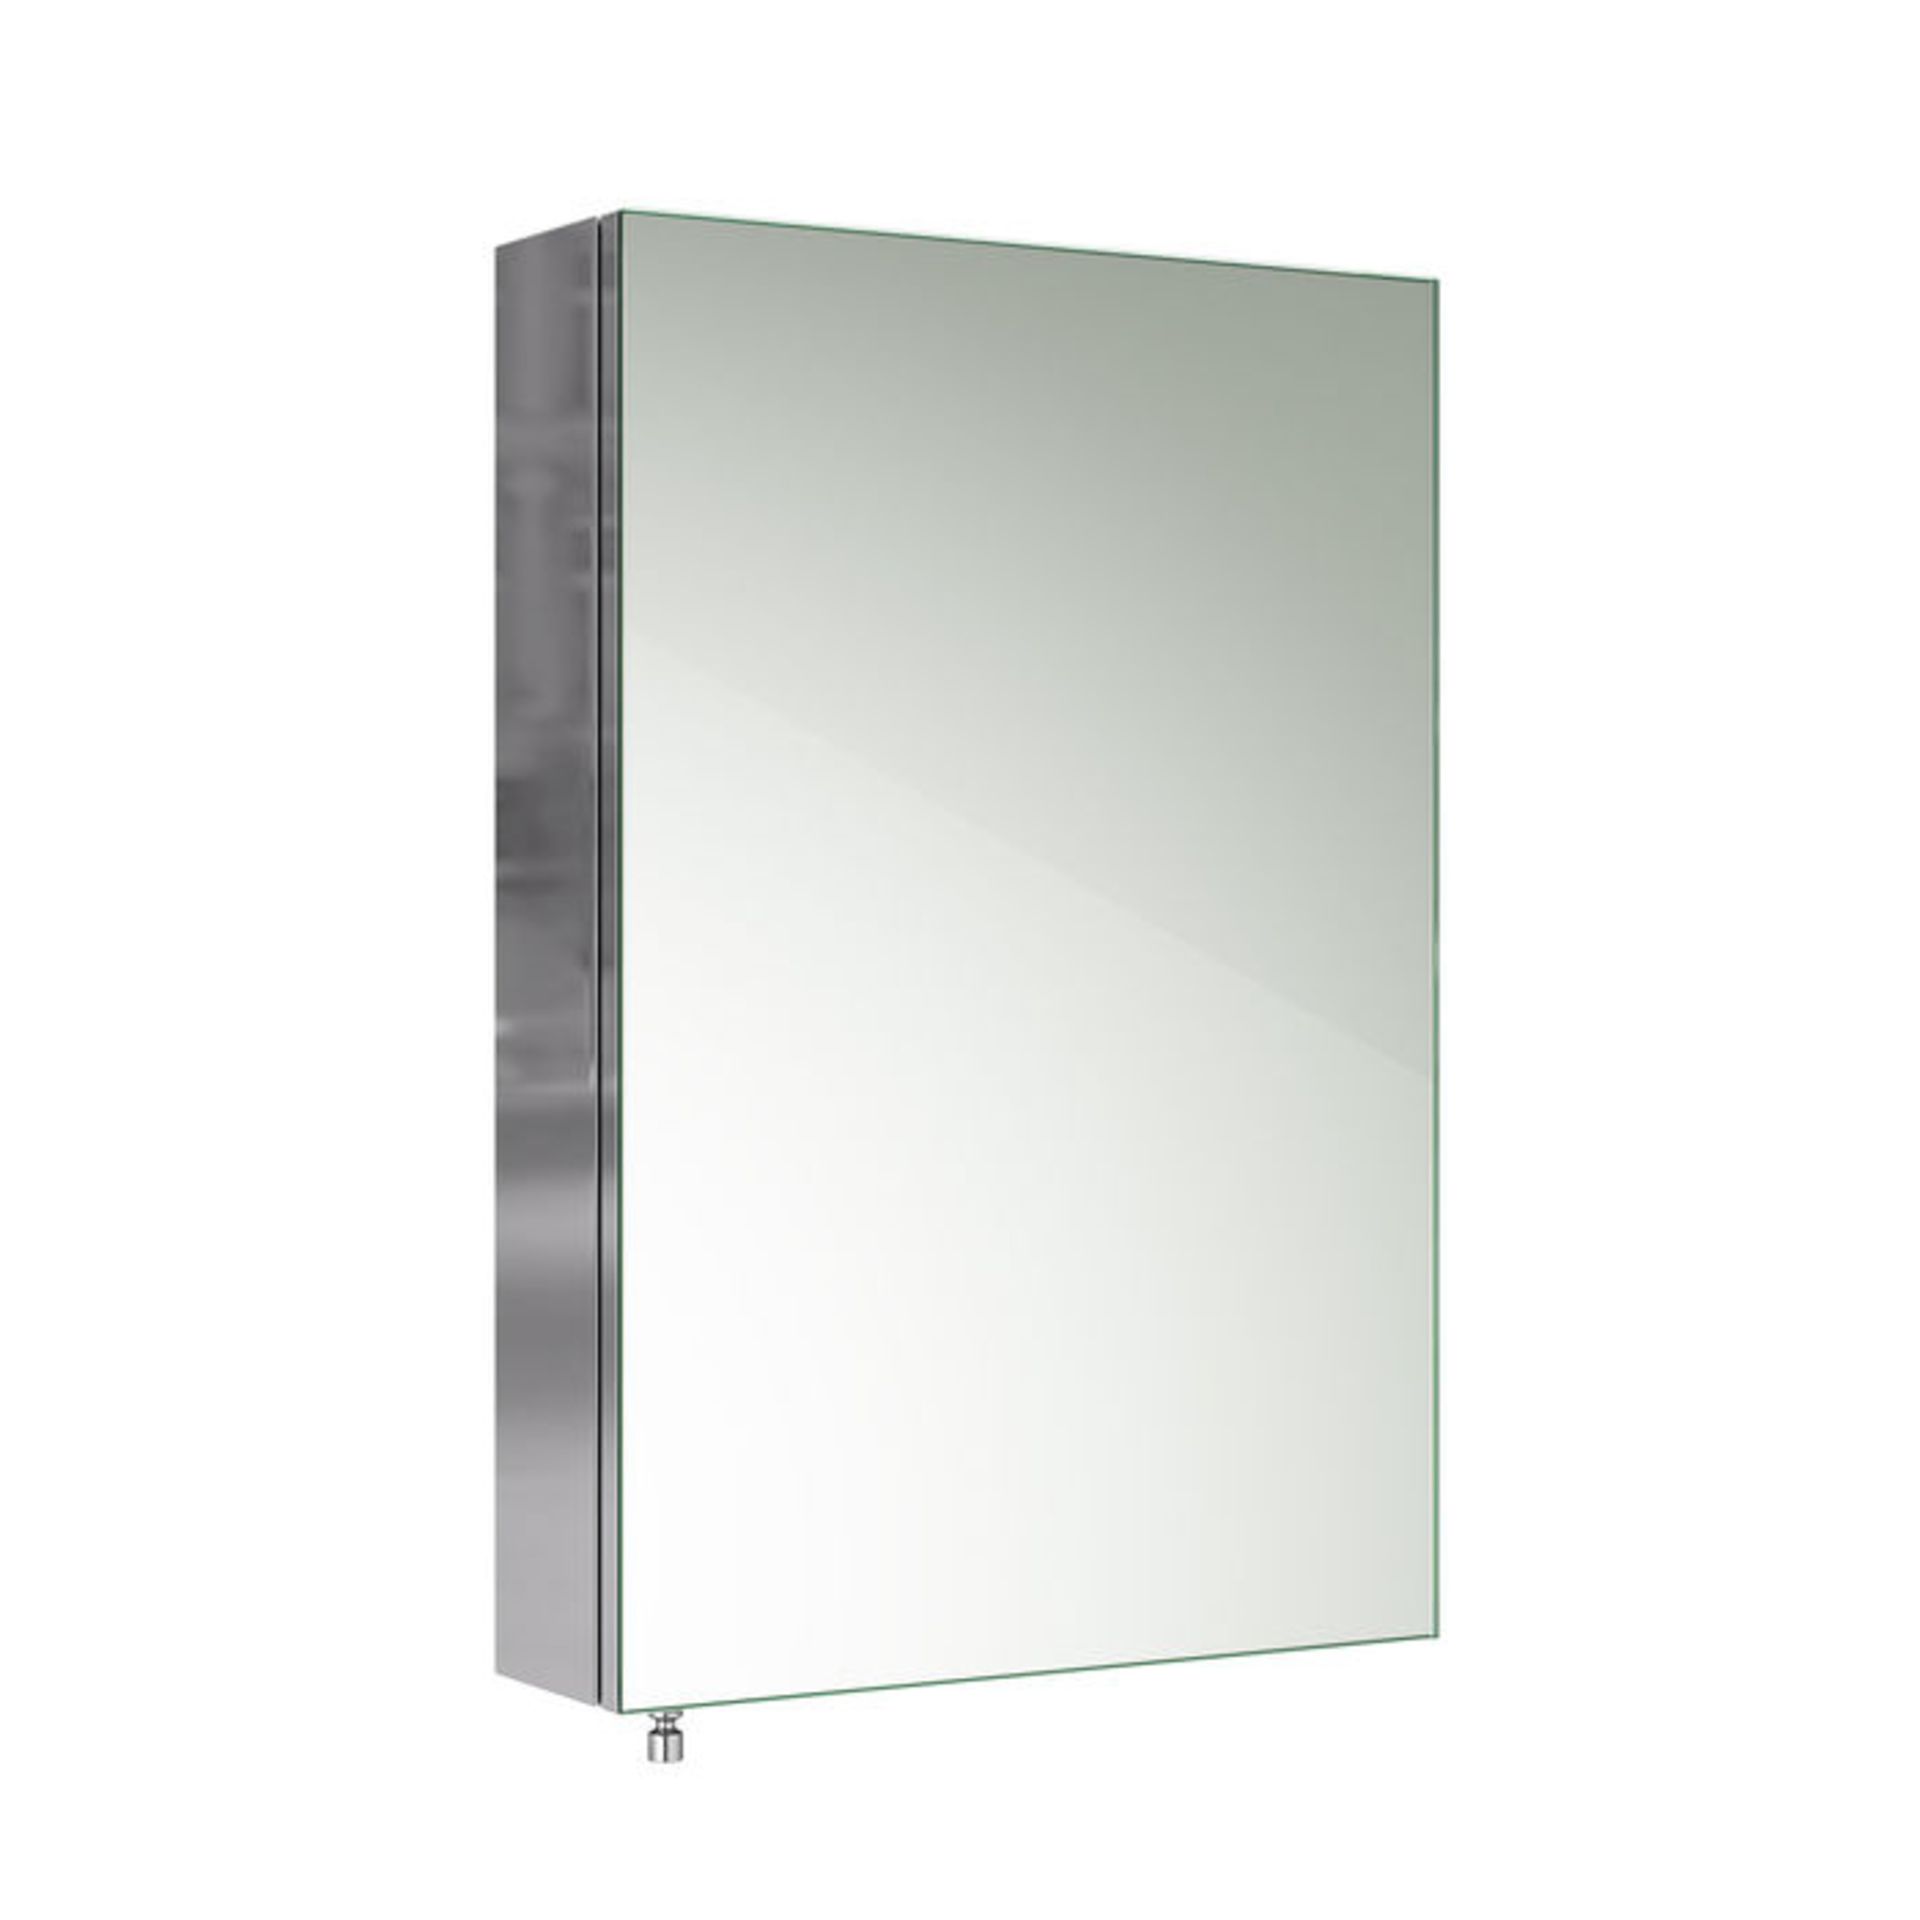 (KL32) 400x600mm Liberty Stainless Steel Single Door Mirror Cabinet. Made from high-grade - Image 4 of 4